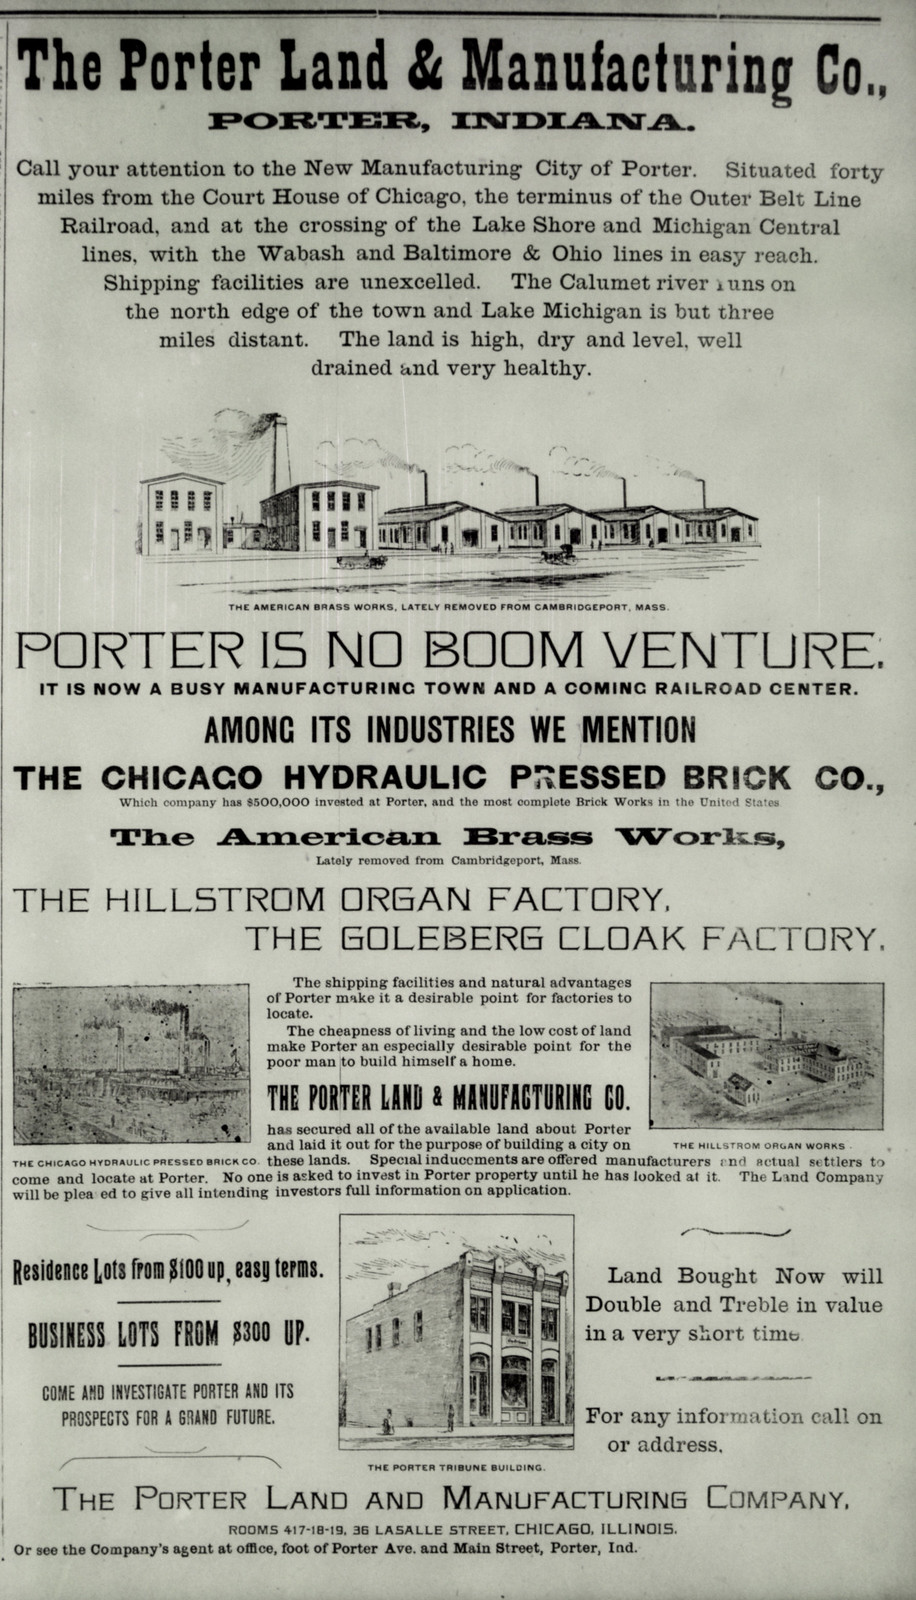 Advertisement of the Porter Land & Manufacturing Company, July 27, 1894 - Chesterton, Indiana